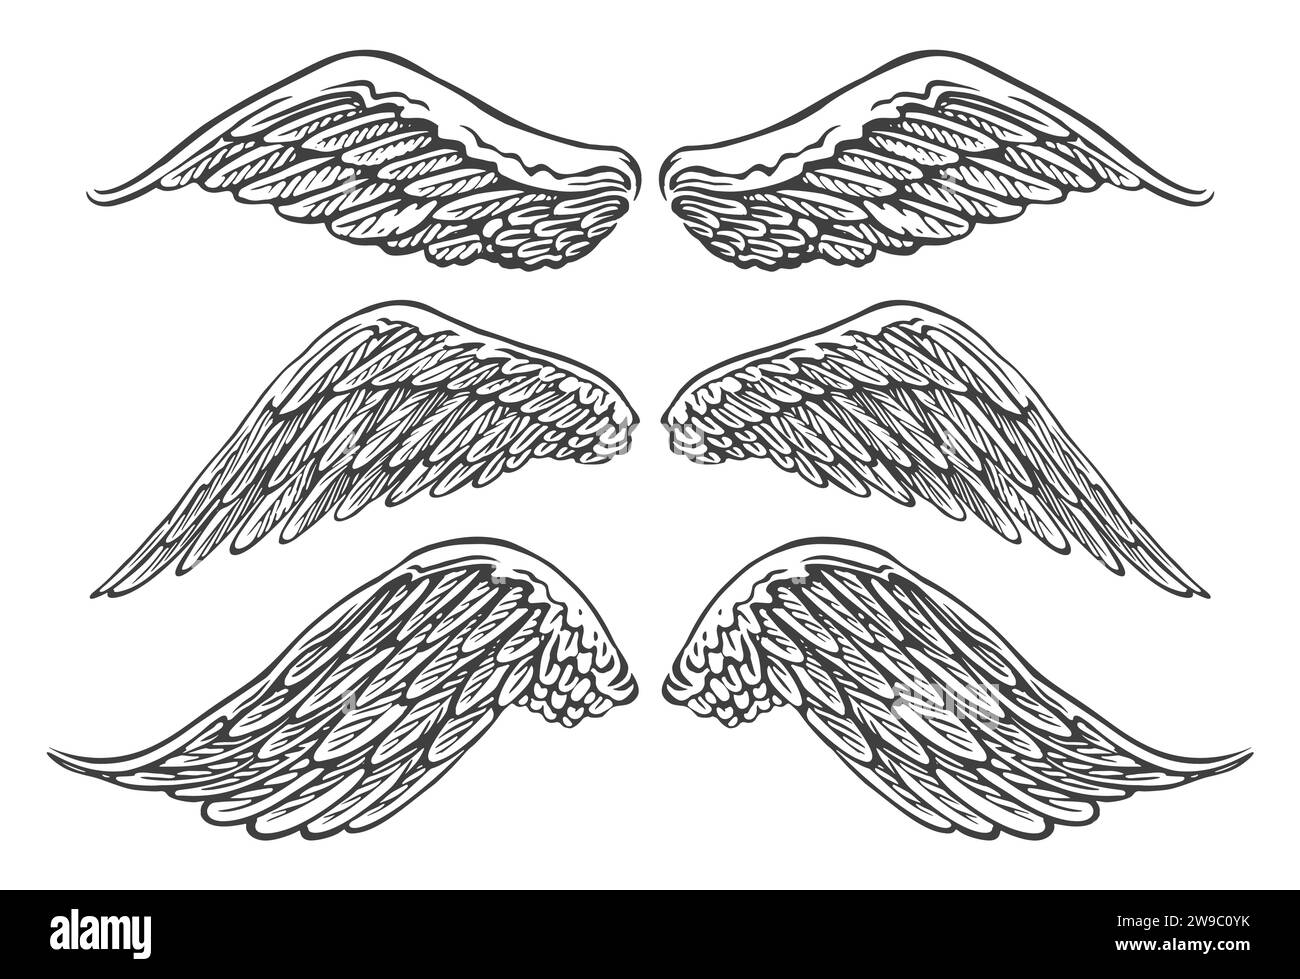 Wings of birds or angels of various shapes in an open position. Hand drawn sketch vintage vector illustration Stock Vector